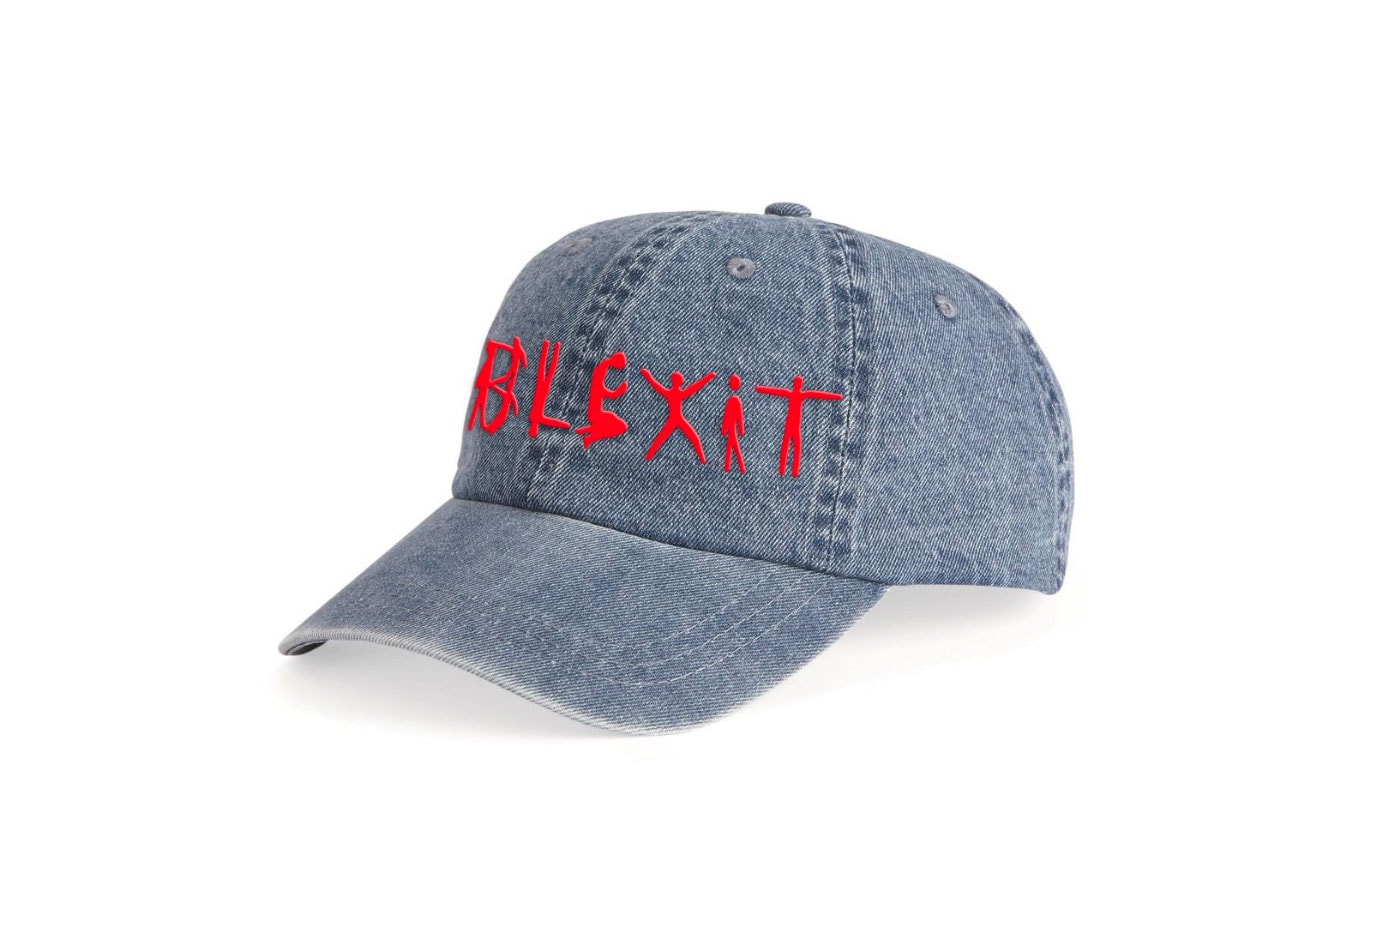 Kanye West Designs "Blexit" Merchandise black exit from democratic party candace owens republican controversial politics american usa president donald trump